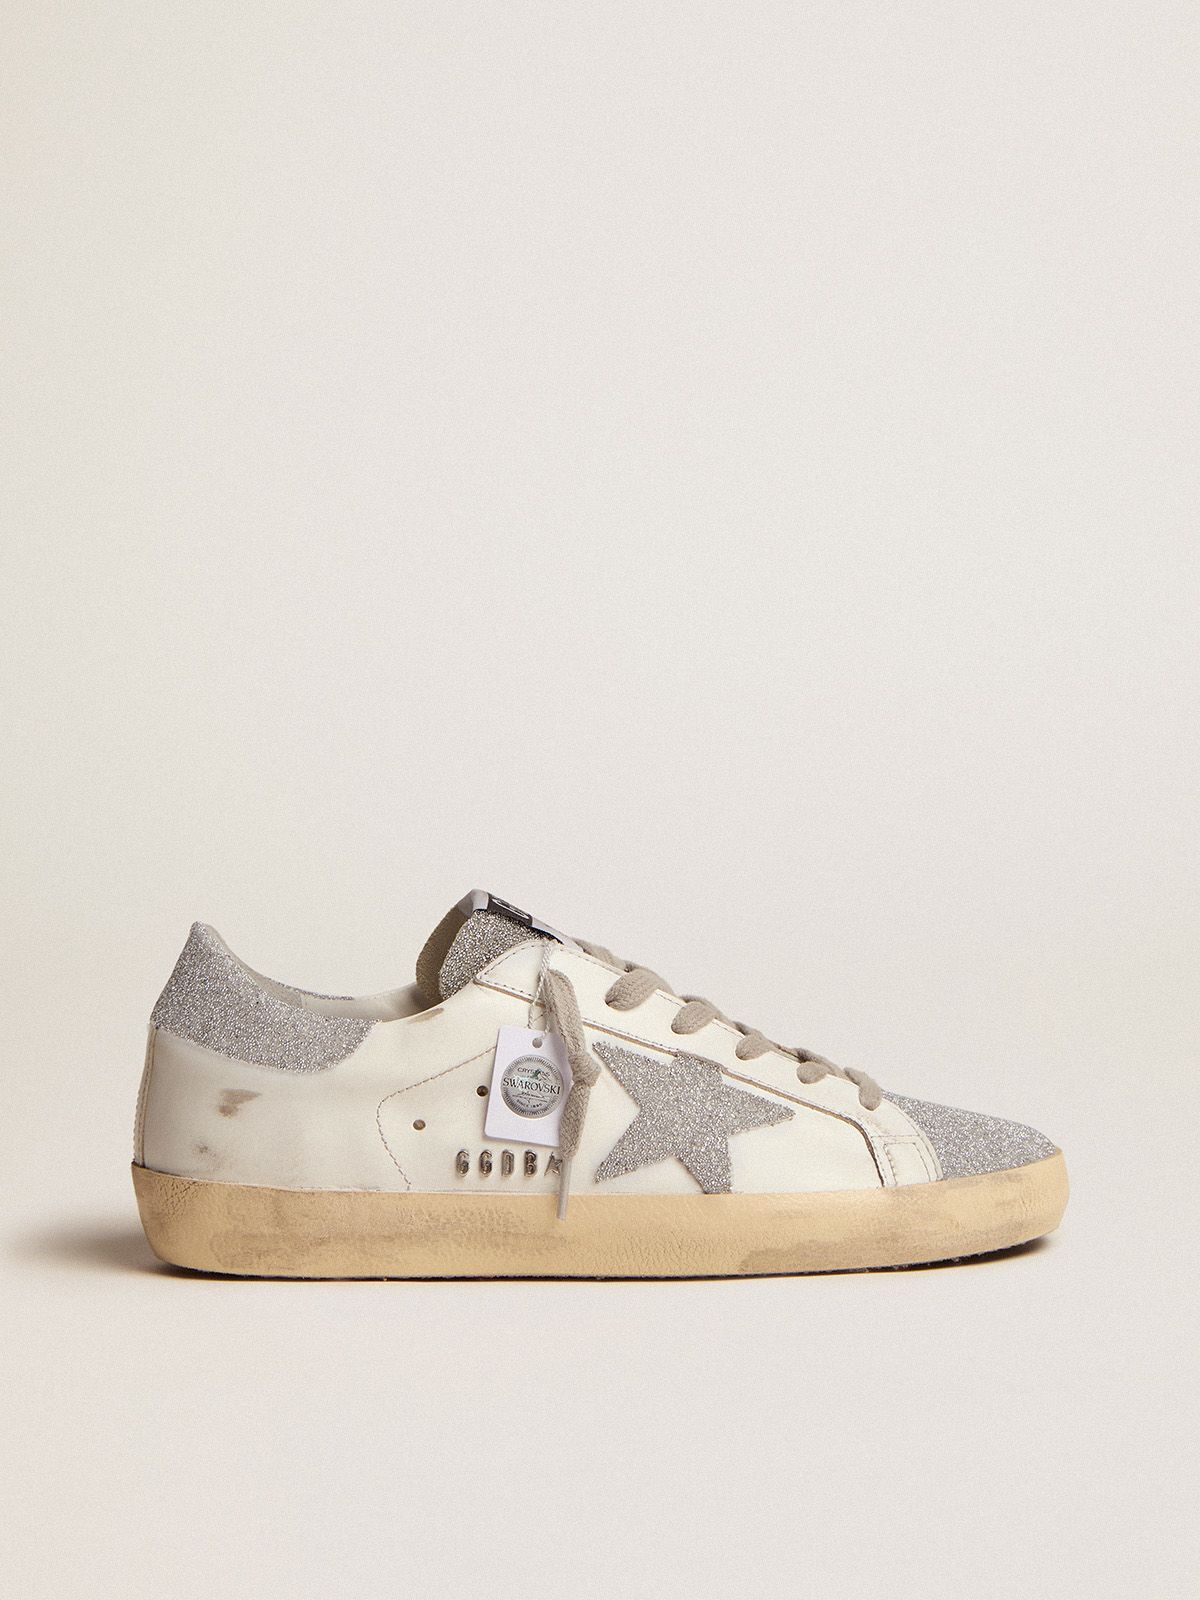 Sneakers Uomo Golden Goose Super-Star sneakers with white leather upper and Swarovski crystal inserts